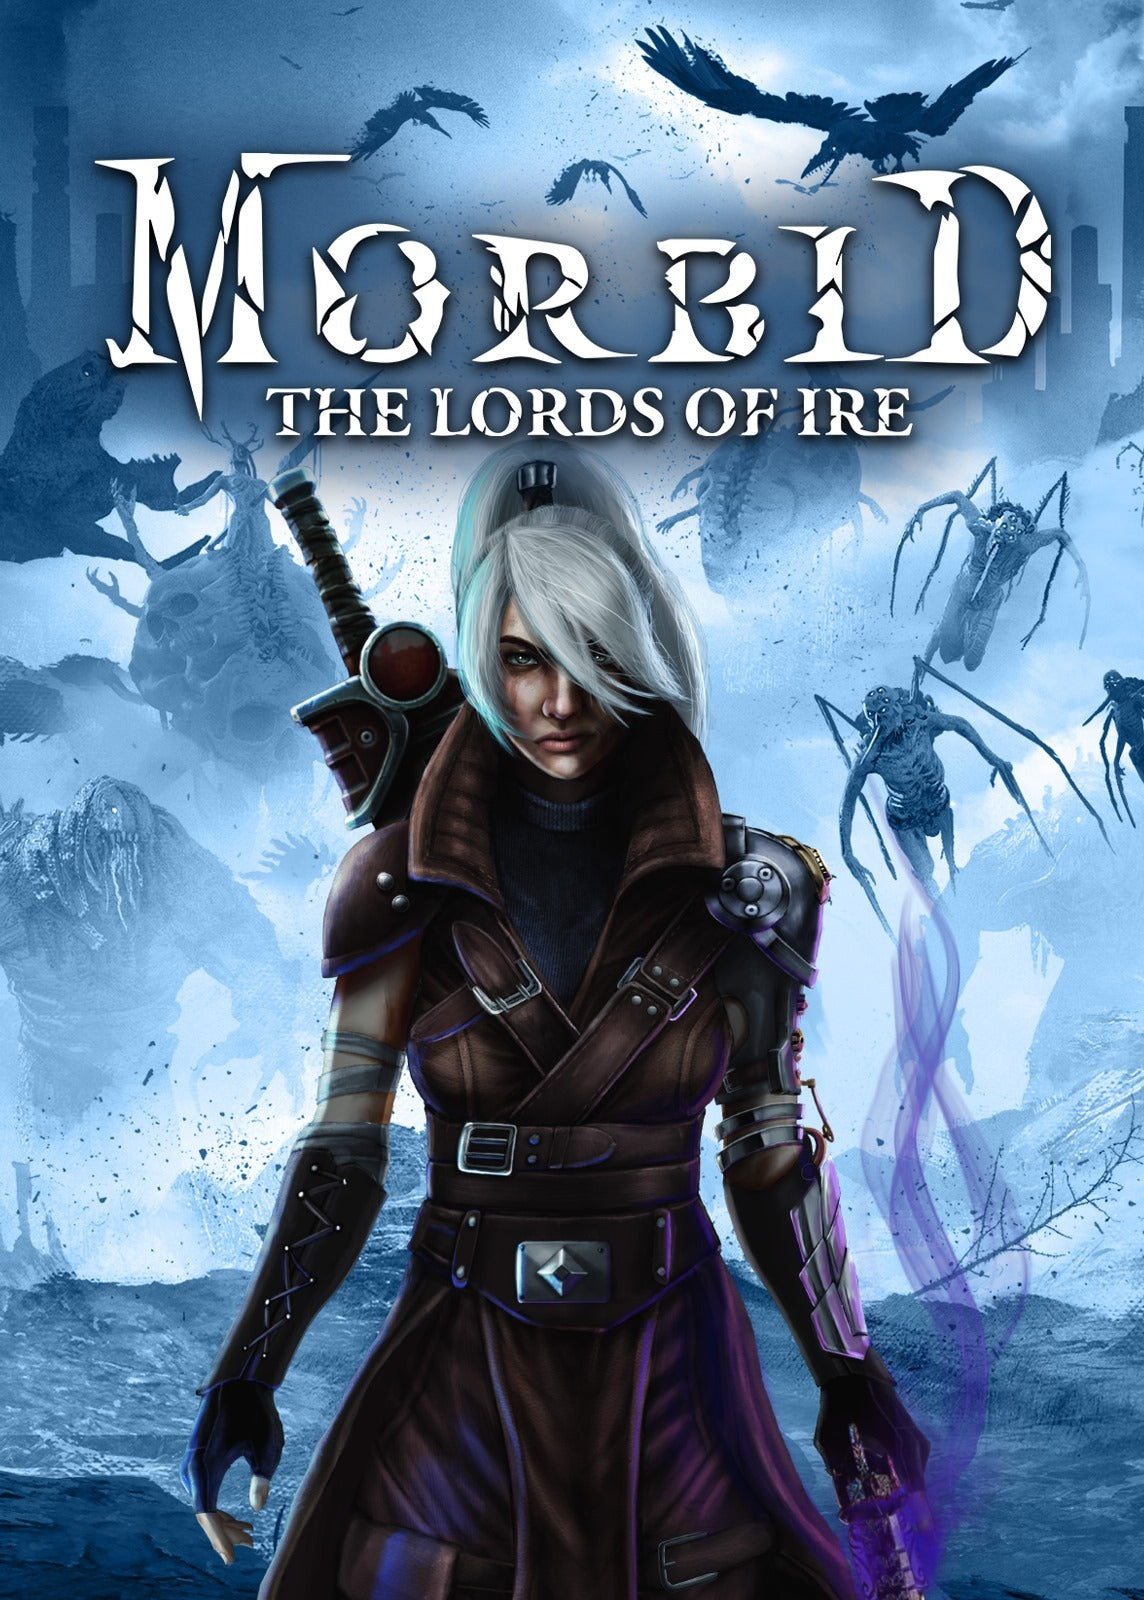 Morbid The Lords of Ire (Standard Edition) - Xbox